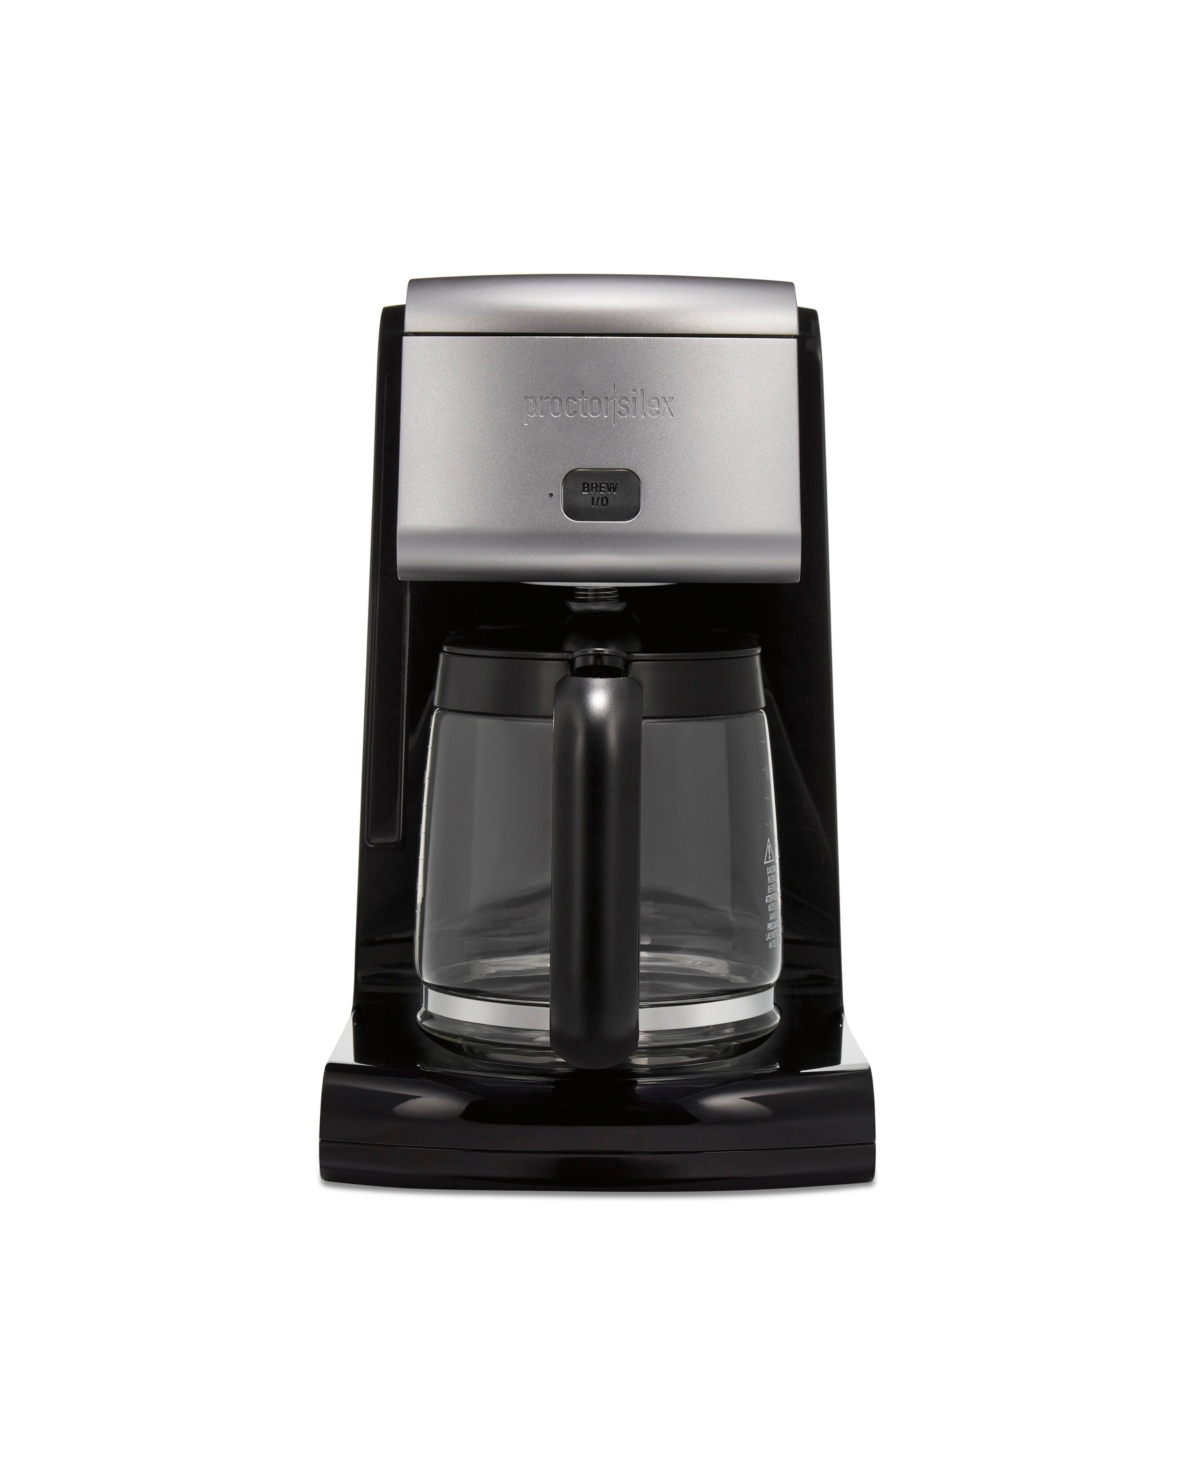 Proctor Silex Frontfill Coffee Maker In Black And Silver-tone